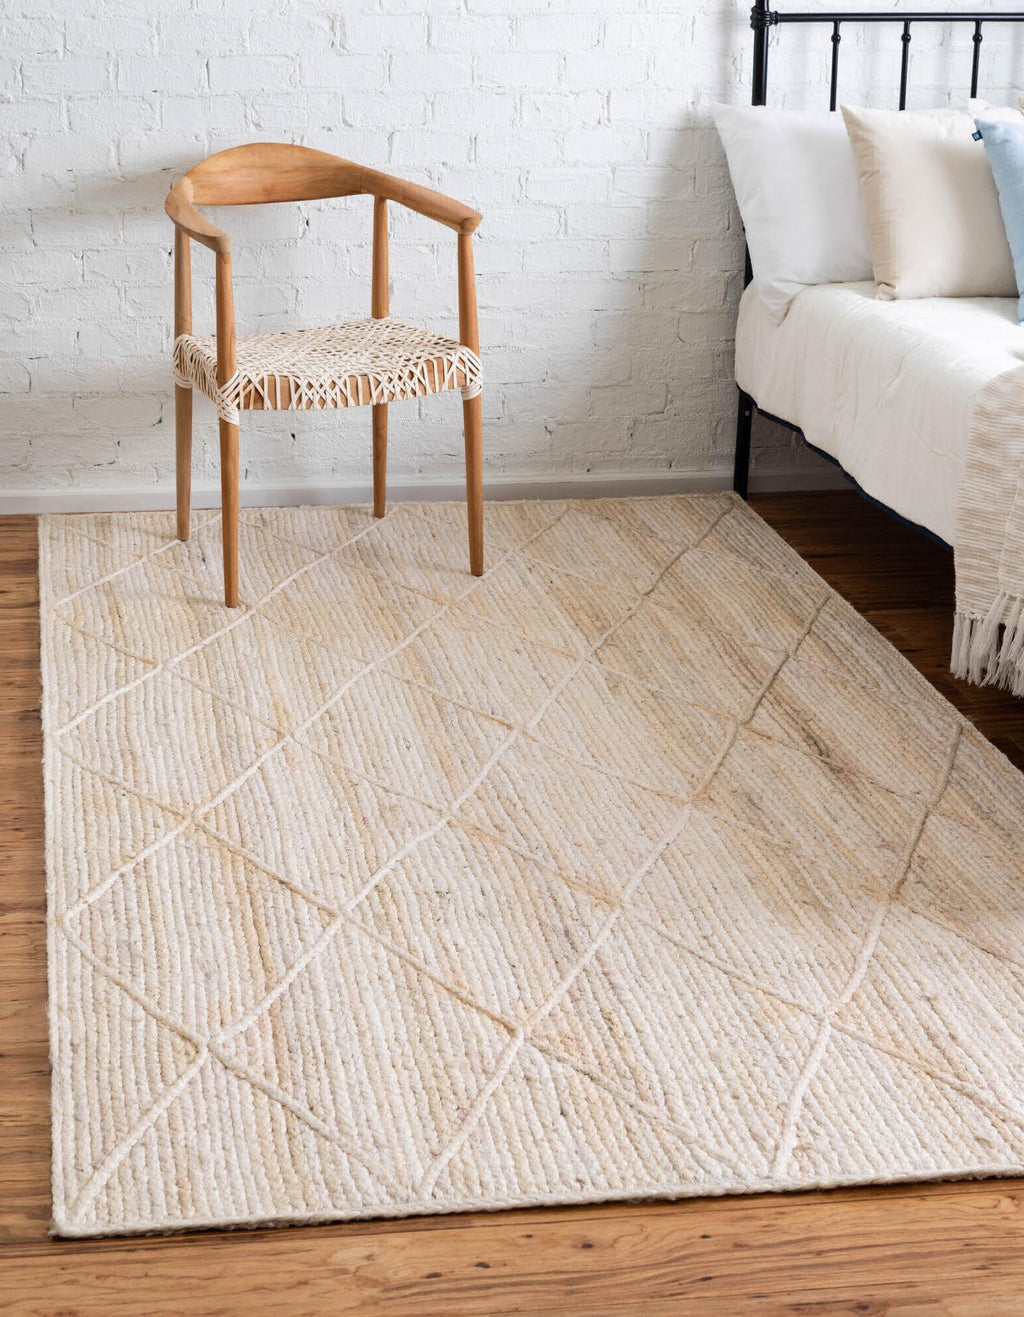 Unique Loom Braided Jute MGN-28 Ivory Area Rug Rectangle Lifestyle Image Feature